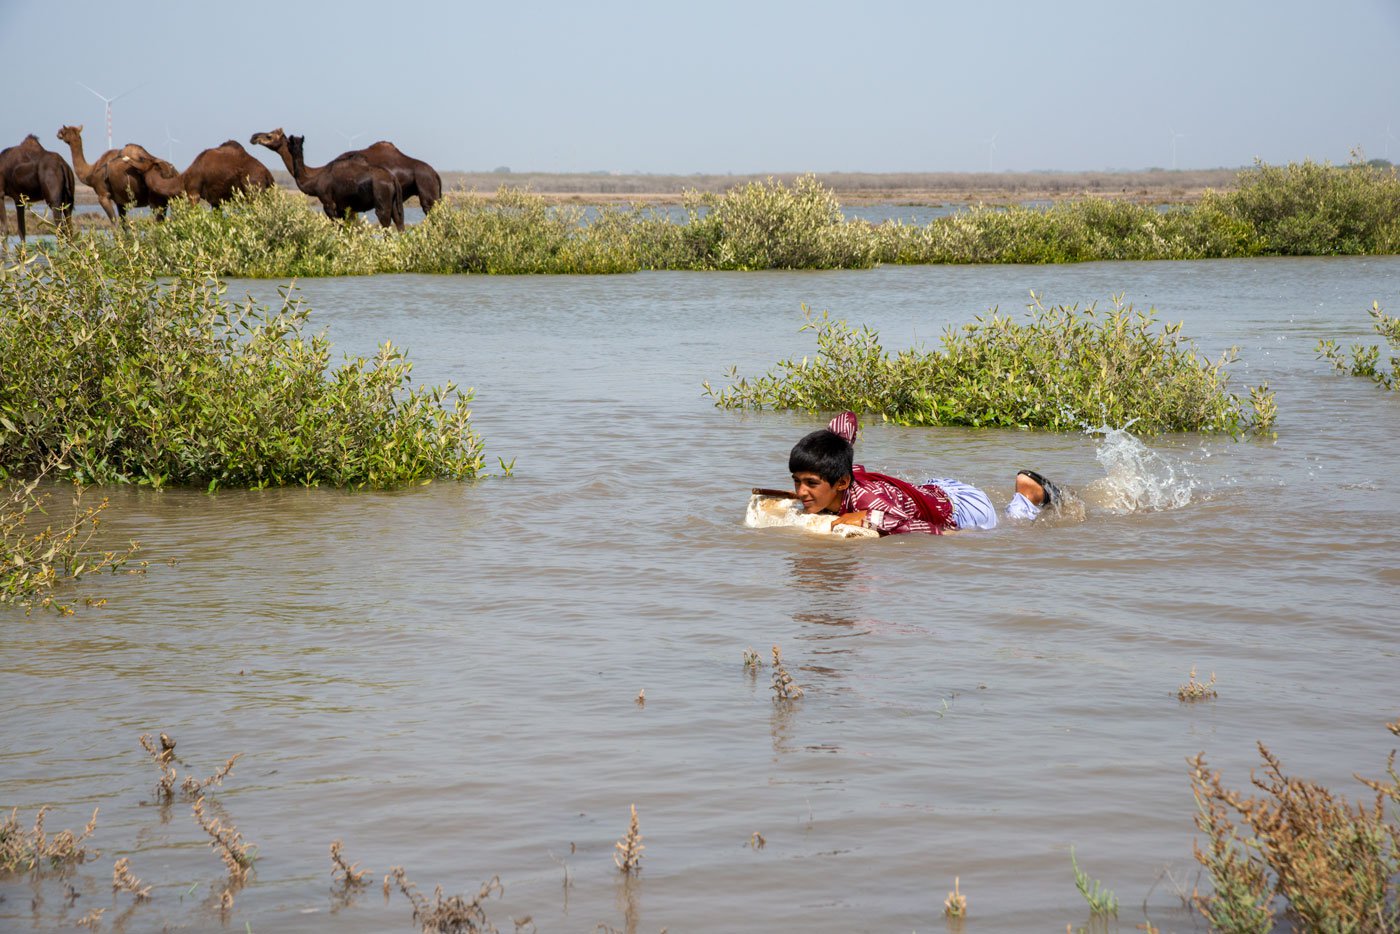 Hari, Jethabhai Rabari's son, swimming near his camels. ‘I love to swim with the camels. It’s so much fun!’